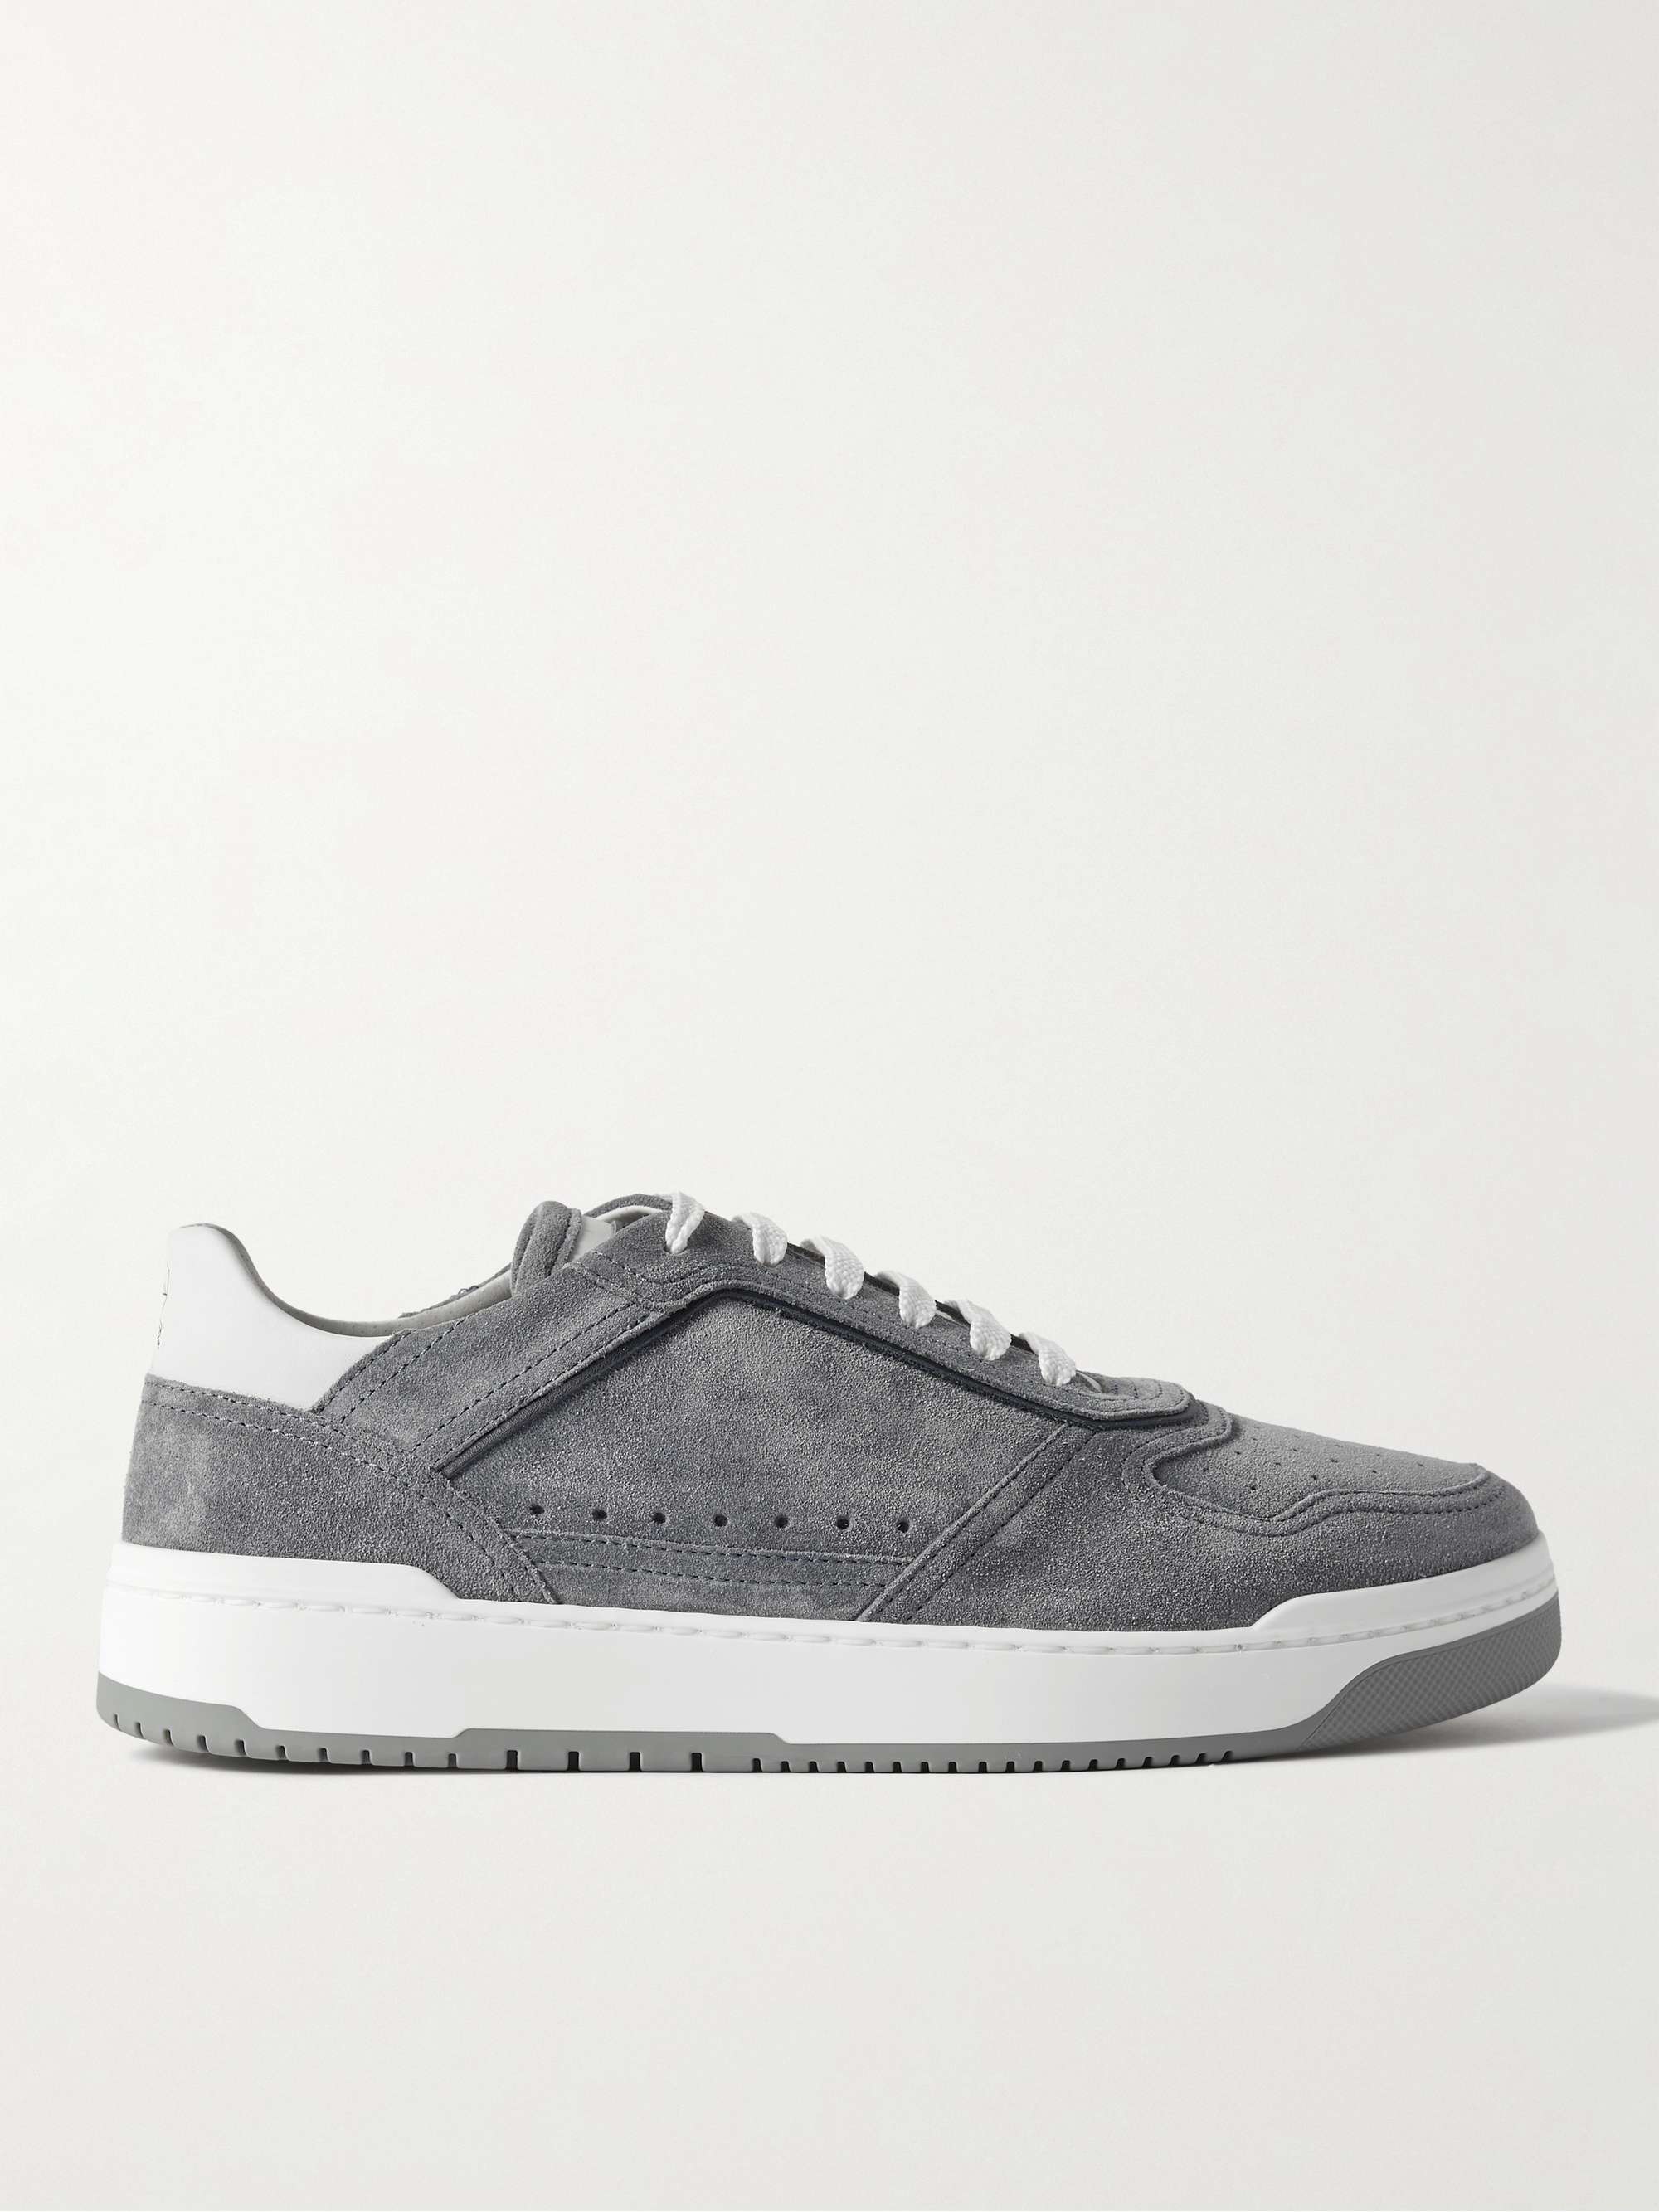 BRUNELLO CUCINELLI Suede-Trimmed Leather Sneakers